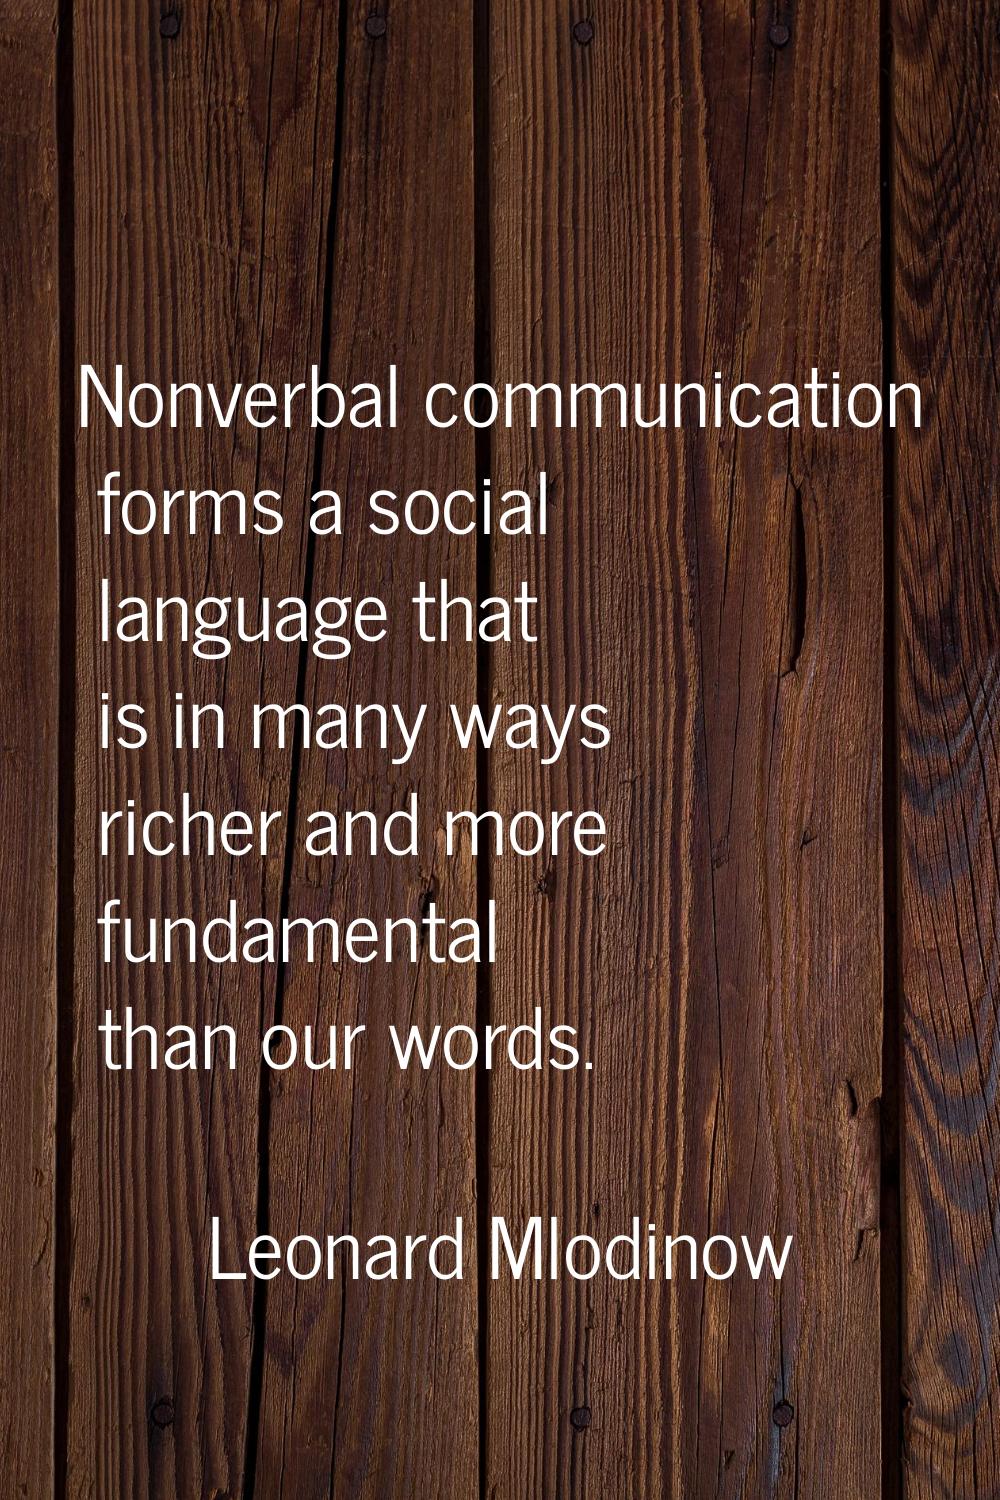 Nonverbal communication forms a social language that is in many ways richer and more fundamental th